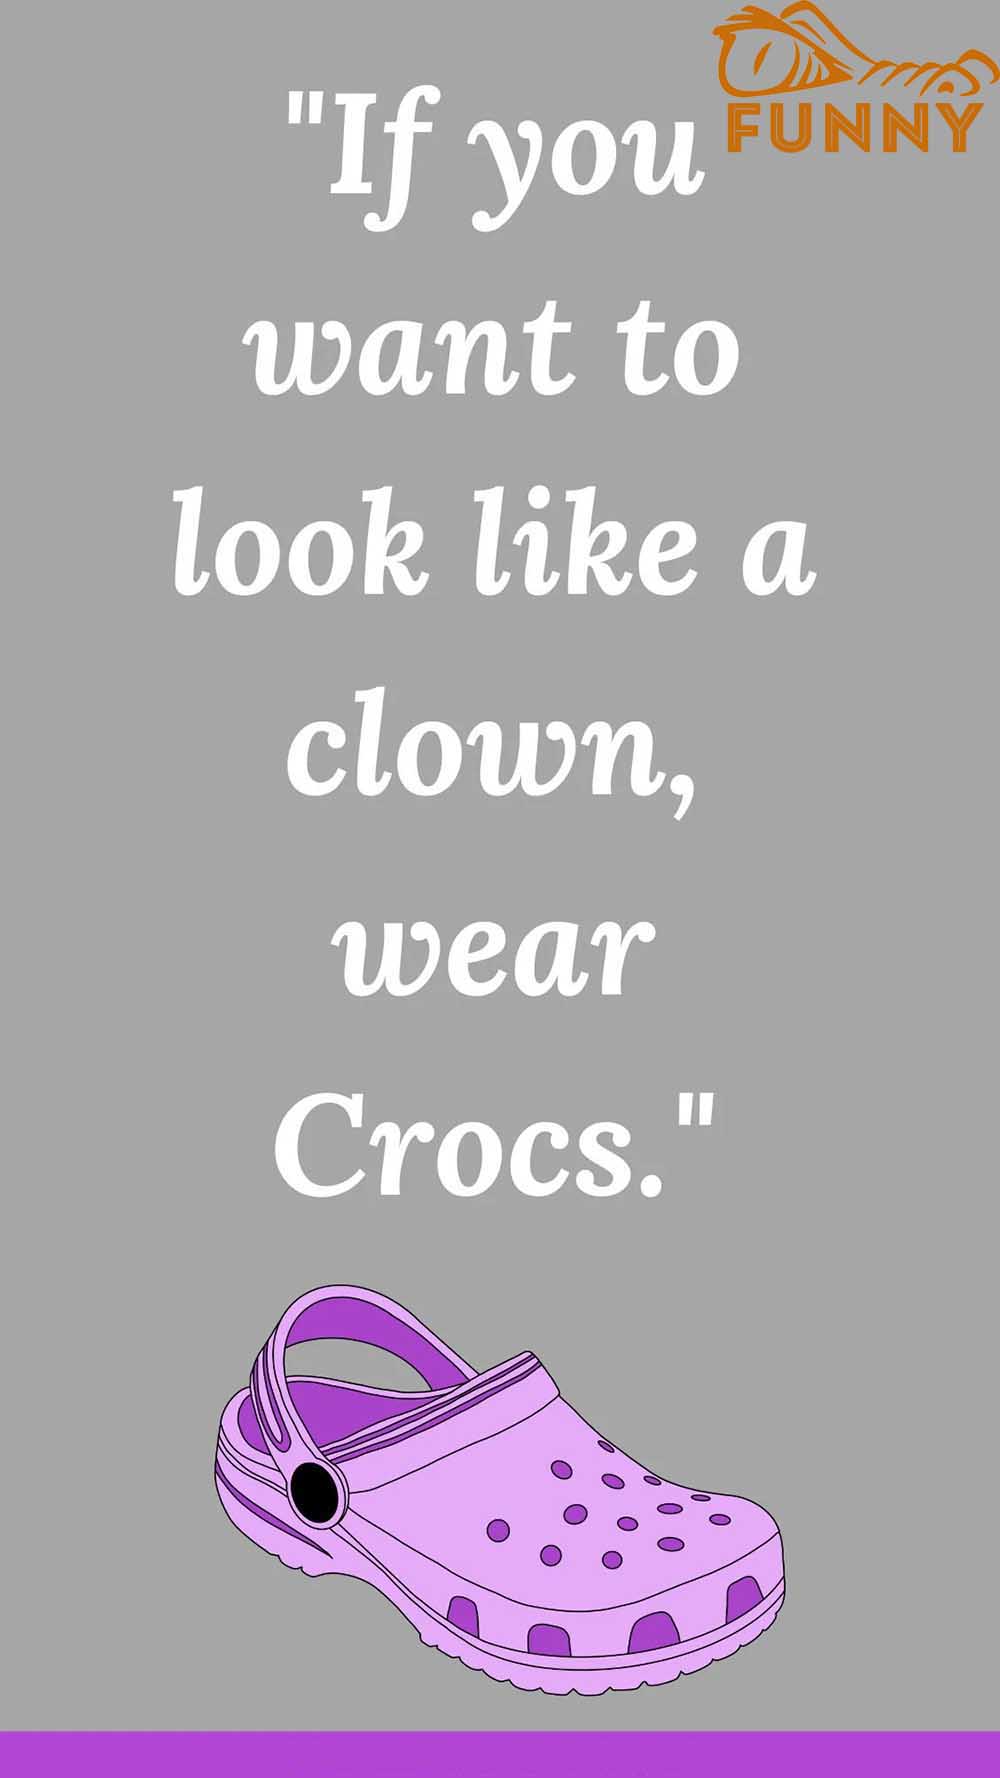 If you want to look like a clown wear Crocs